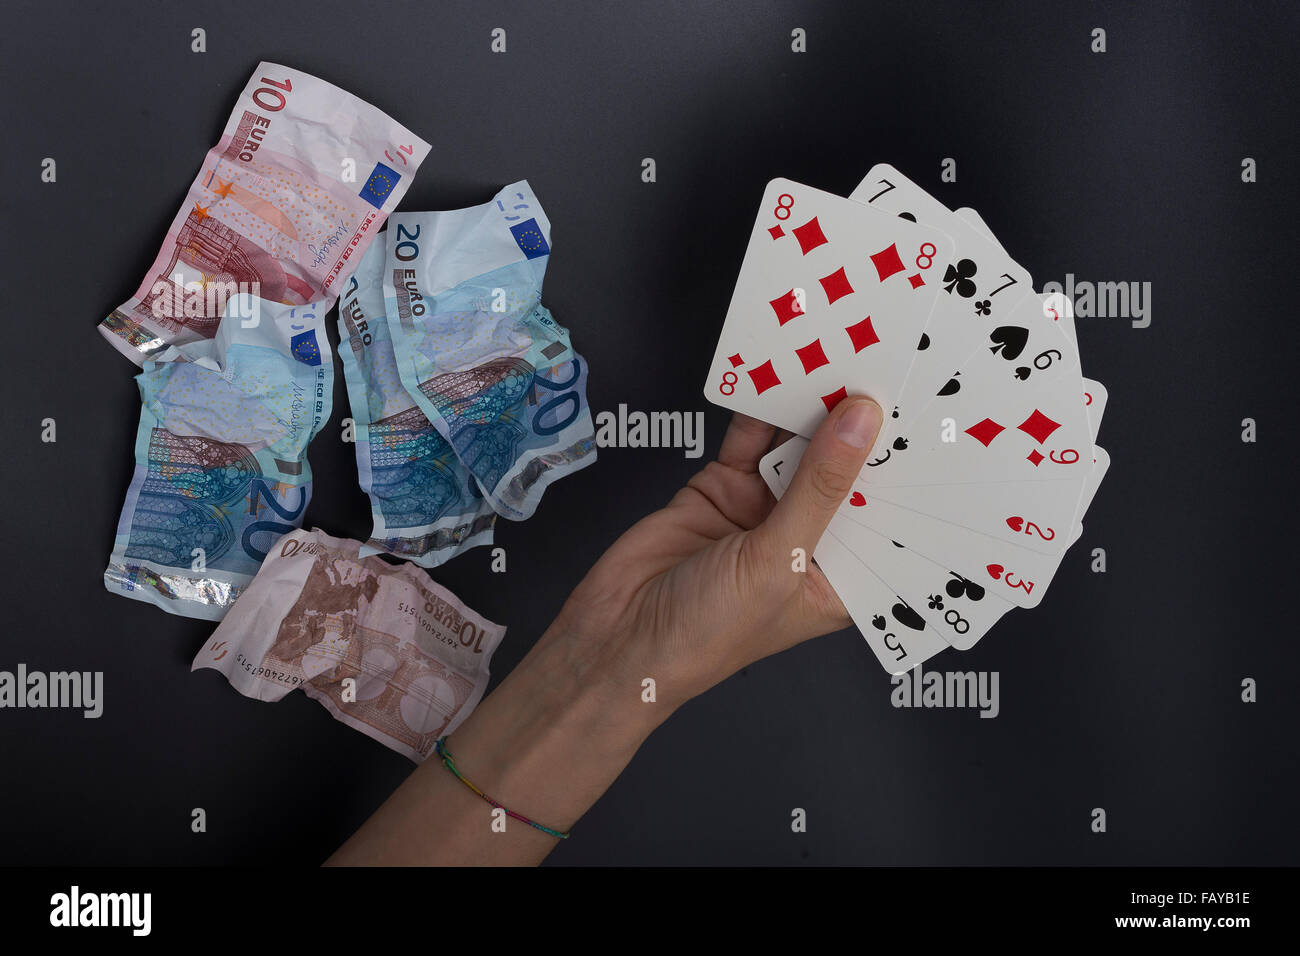 card player, waste money Stock Photo